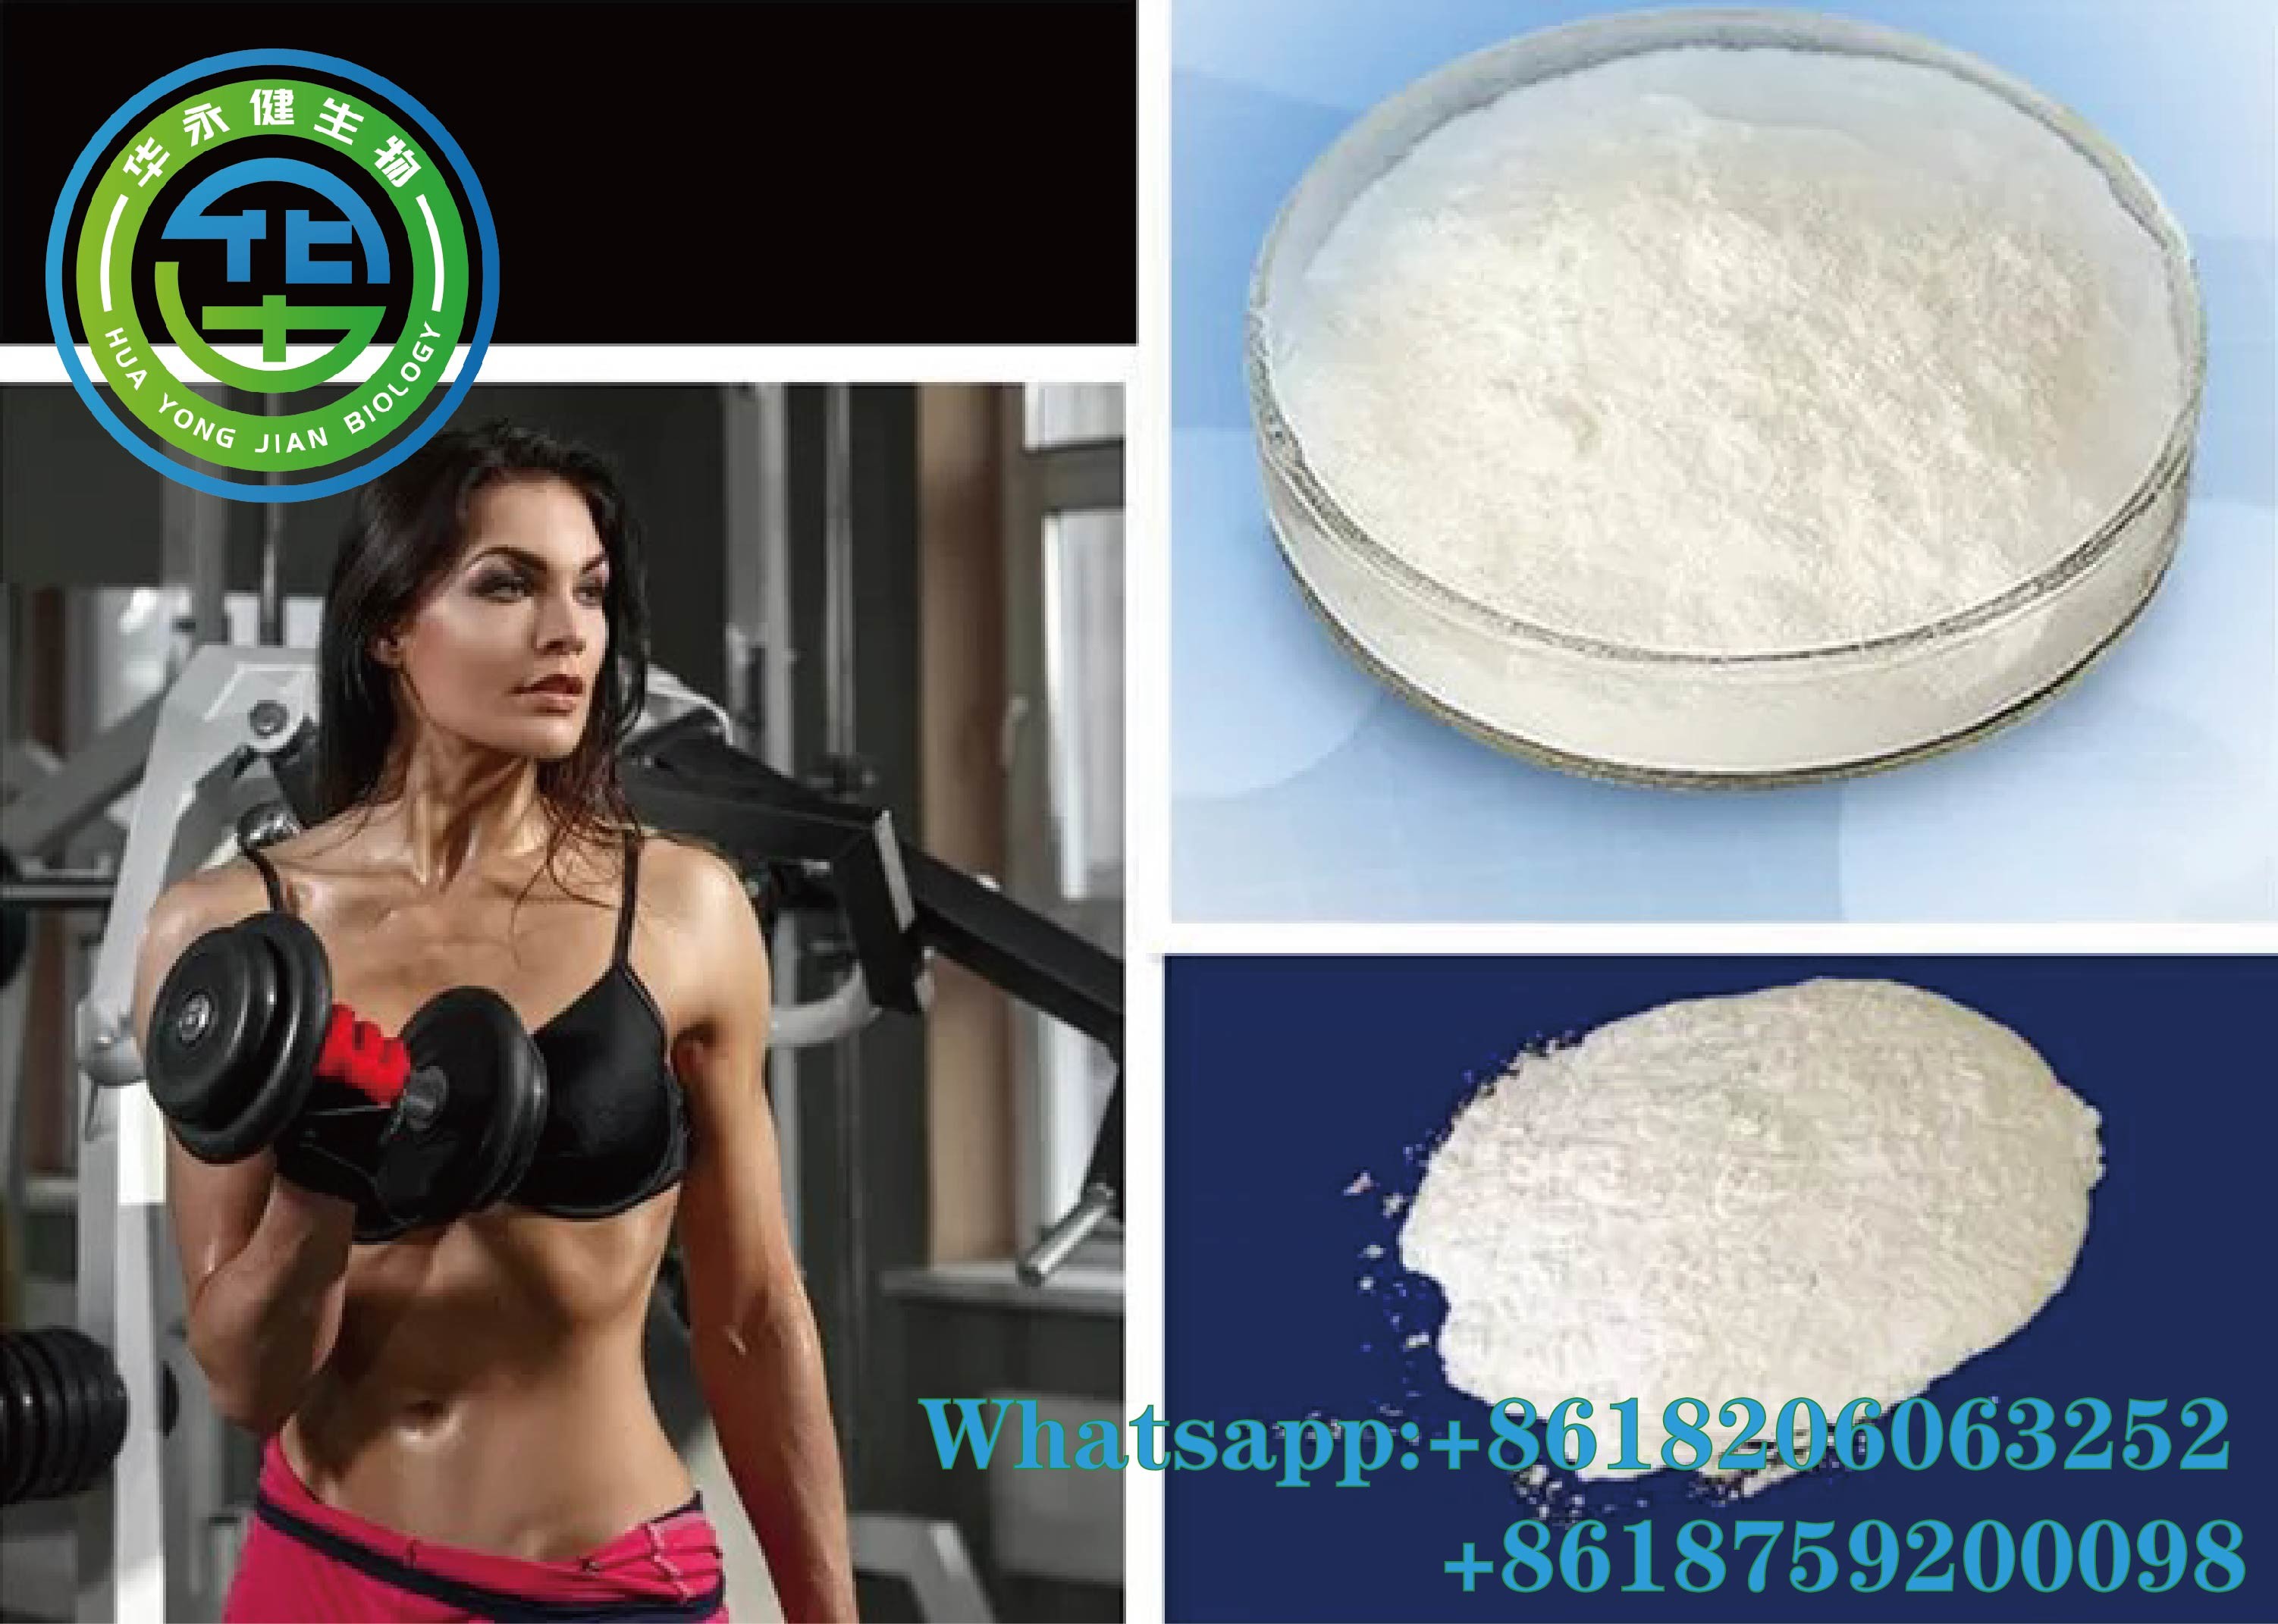 Wholesale Oxandrolone / Anavar Anabolic Steroid Powder For Weight Loss Fat Burning CAS 53-39-4 from china suppliers